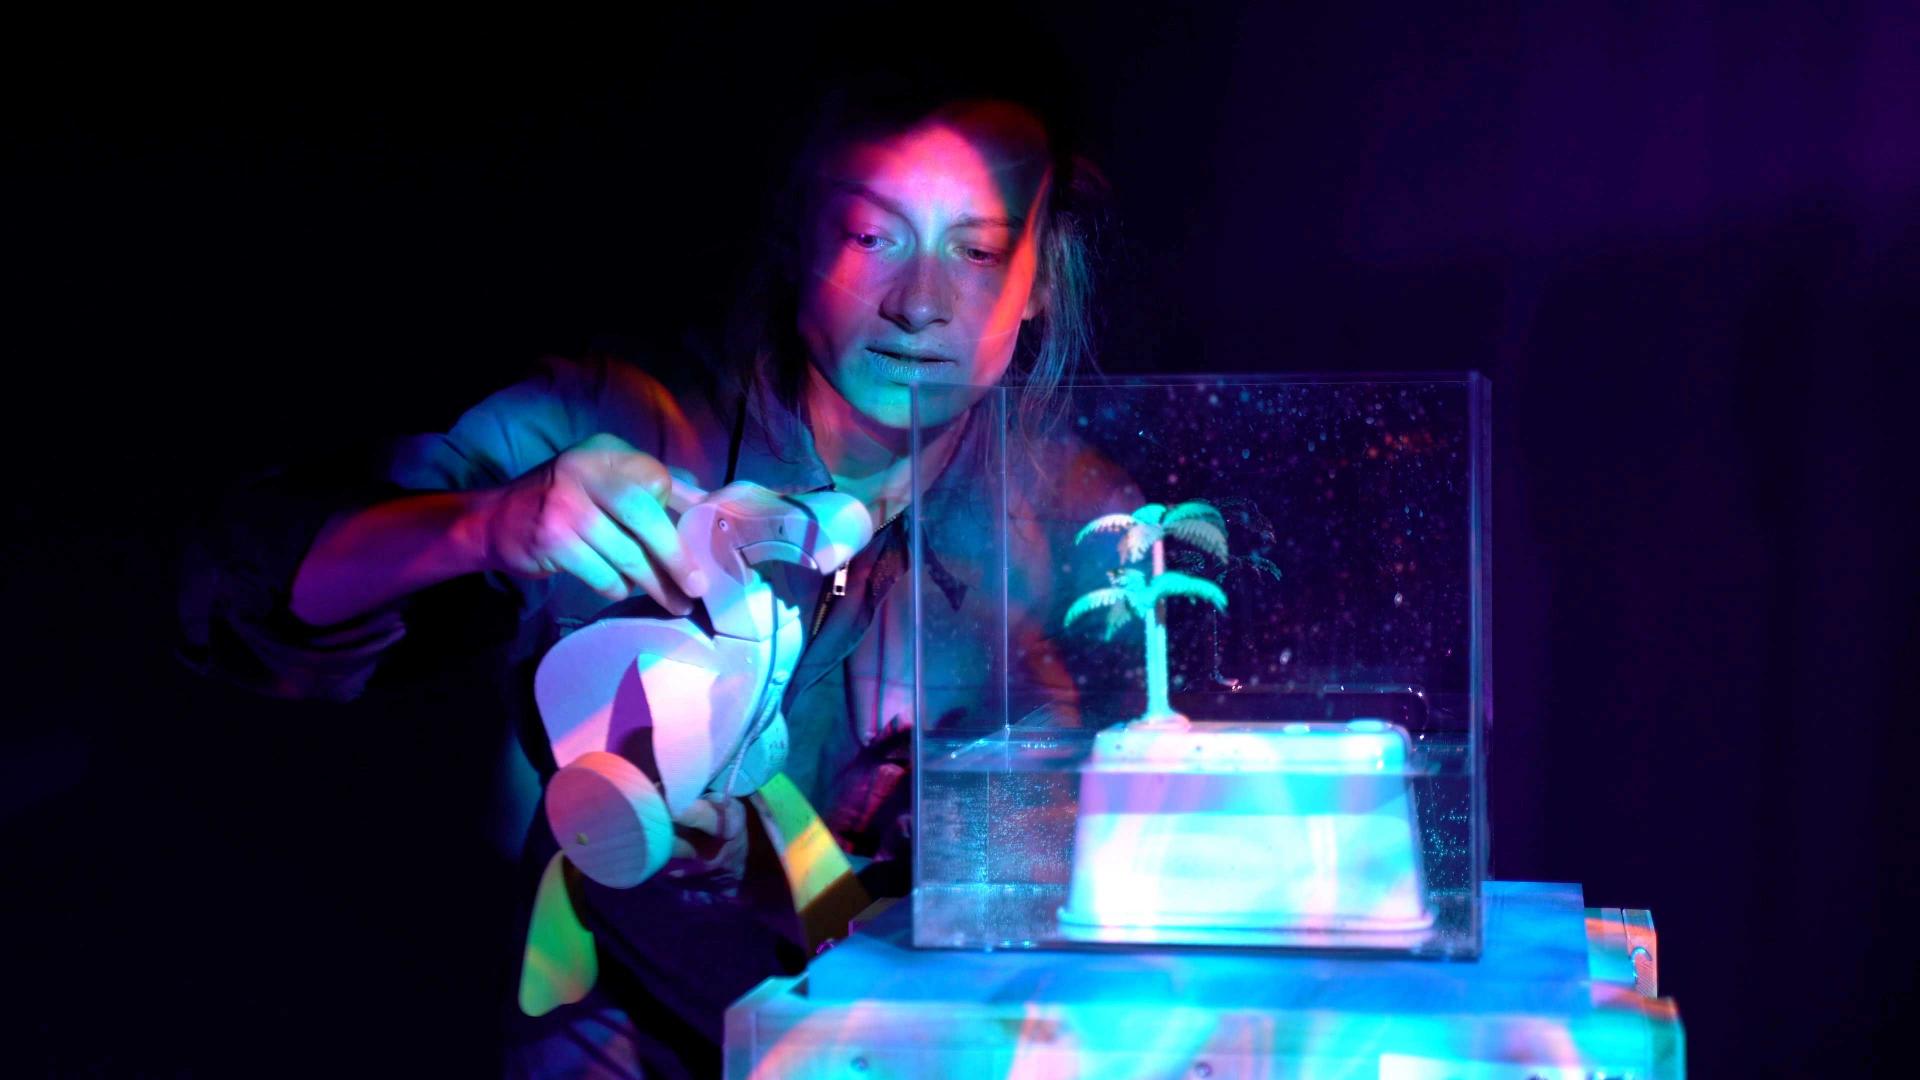 An actress holds a wooden toy in her hands and stands next to a white glass box containing a plastic palm tree. It is dark, the actress and the objects are illuminated by coloured light.